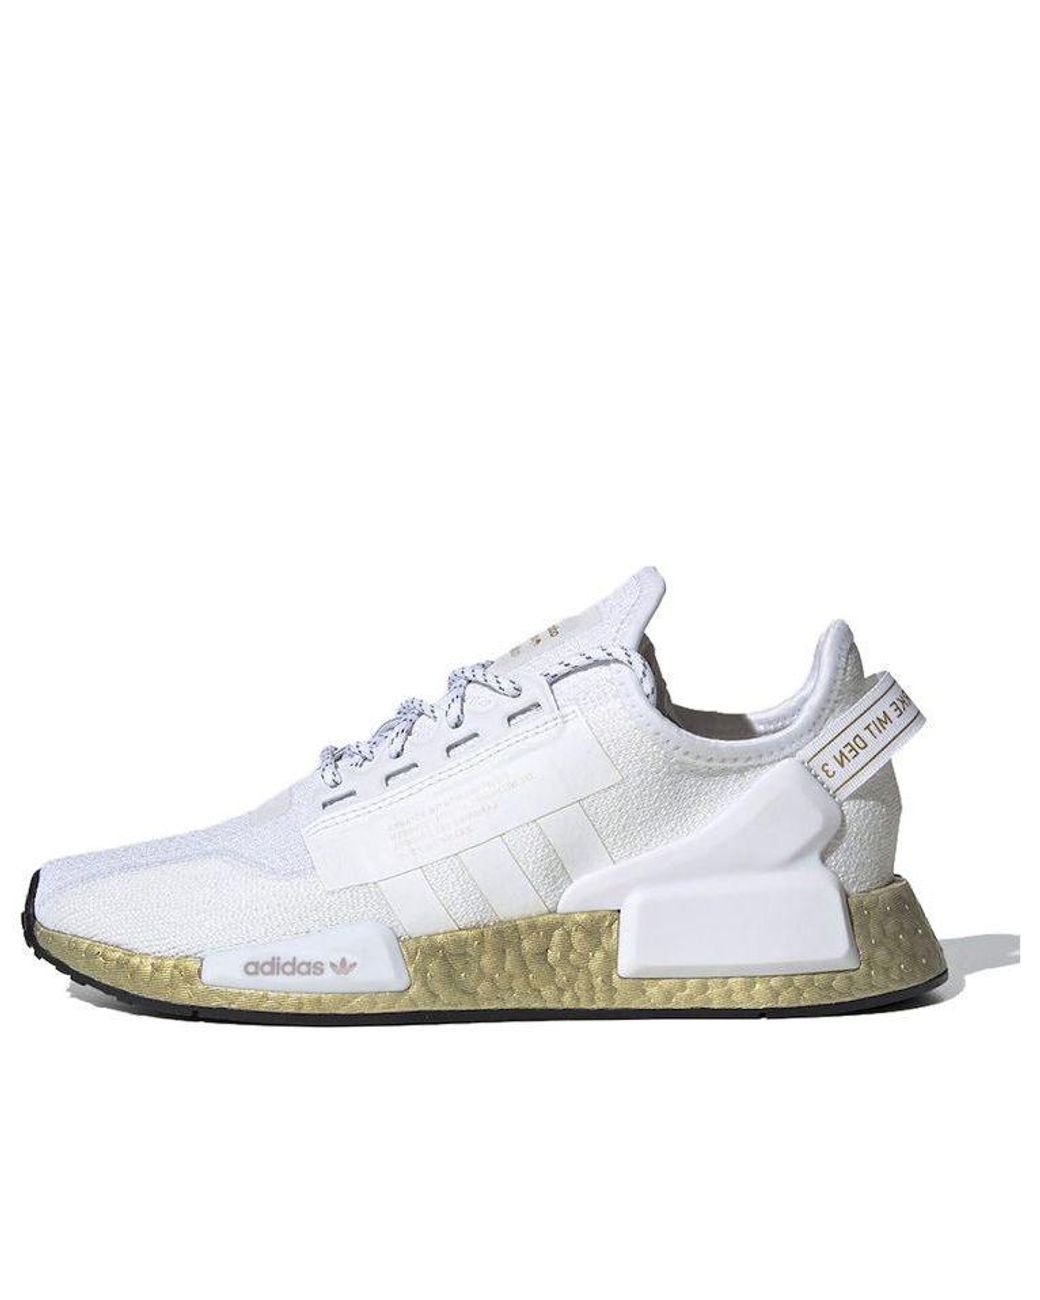 adidas Nmd_r1 V2 'gold Boost' White | Lyst